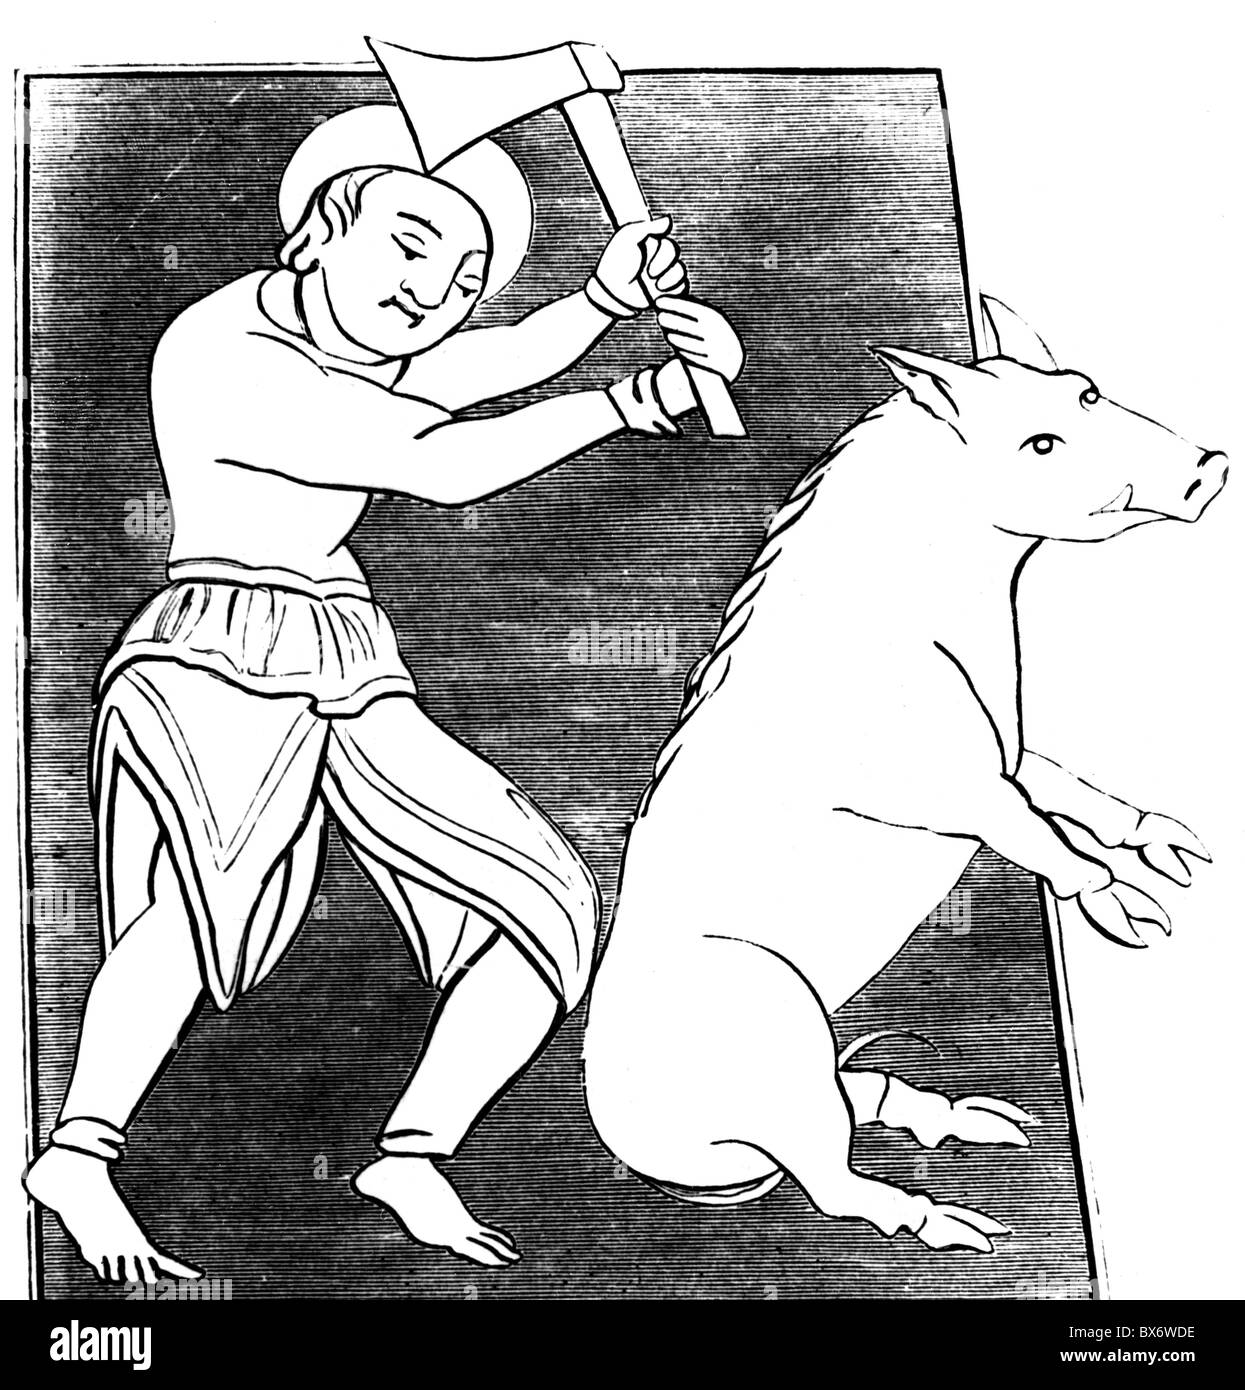 people, professions, butcher, slaughtering a pig, wood engraving after Book of Documents of Solignac Abbey, France, 14th century, slaughter, hog, swine, axe, hatchet, handcraft, craftsman, middle ages, historic, historical, medieval, Additional-Rights-Clearences-Not Available Stock Photo